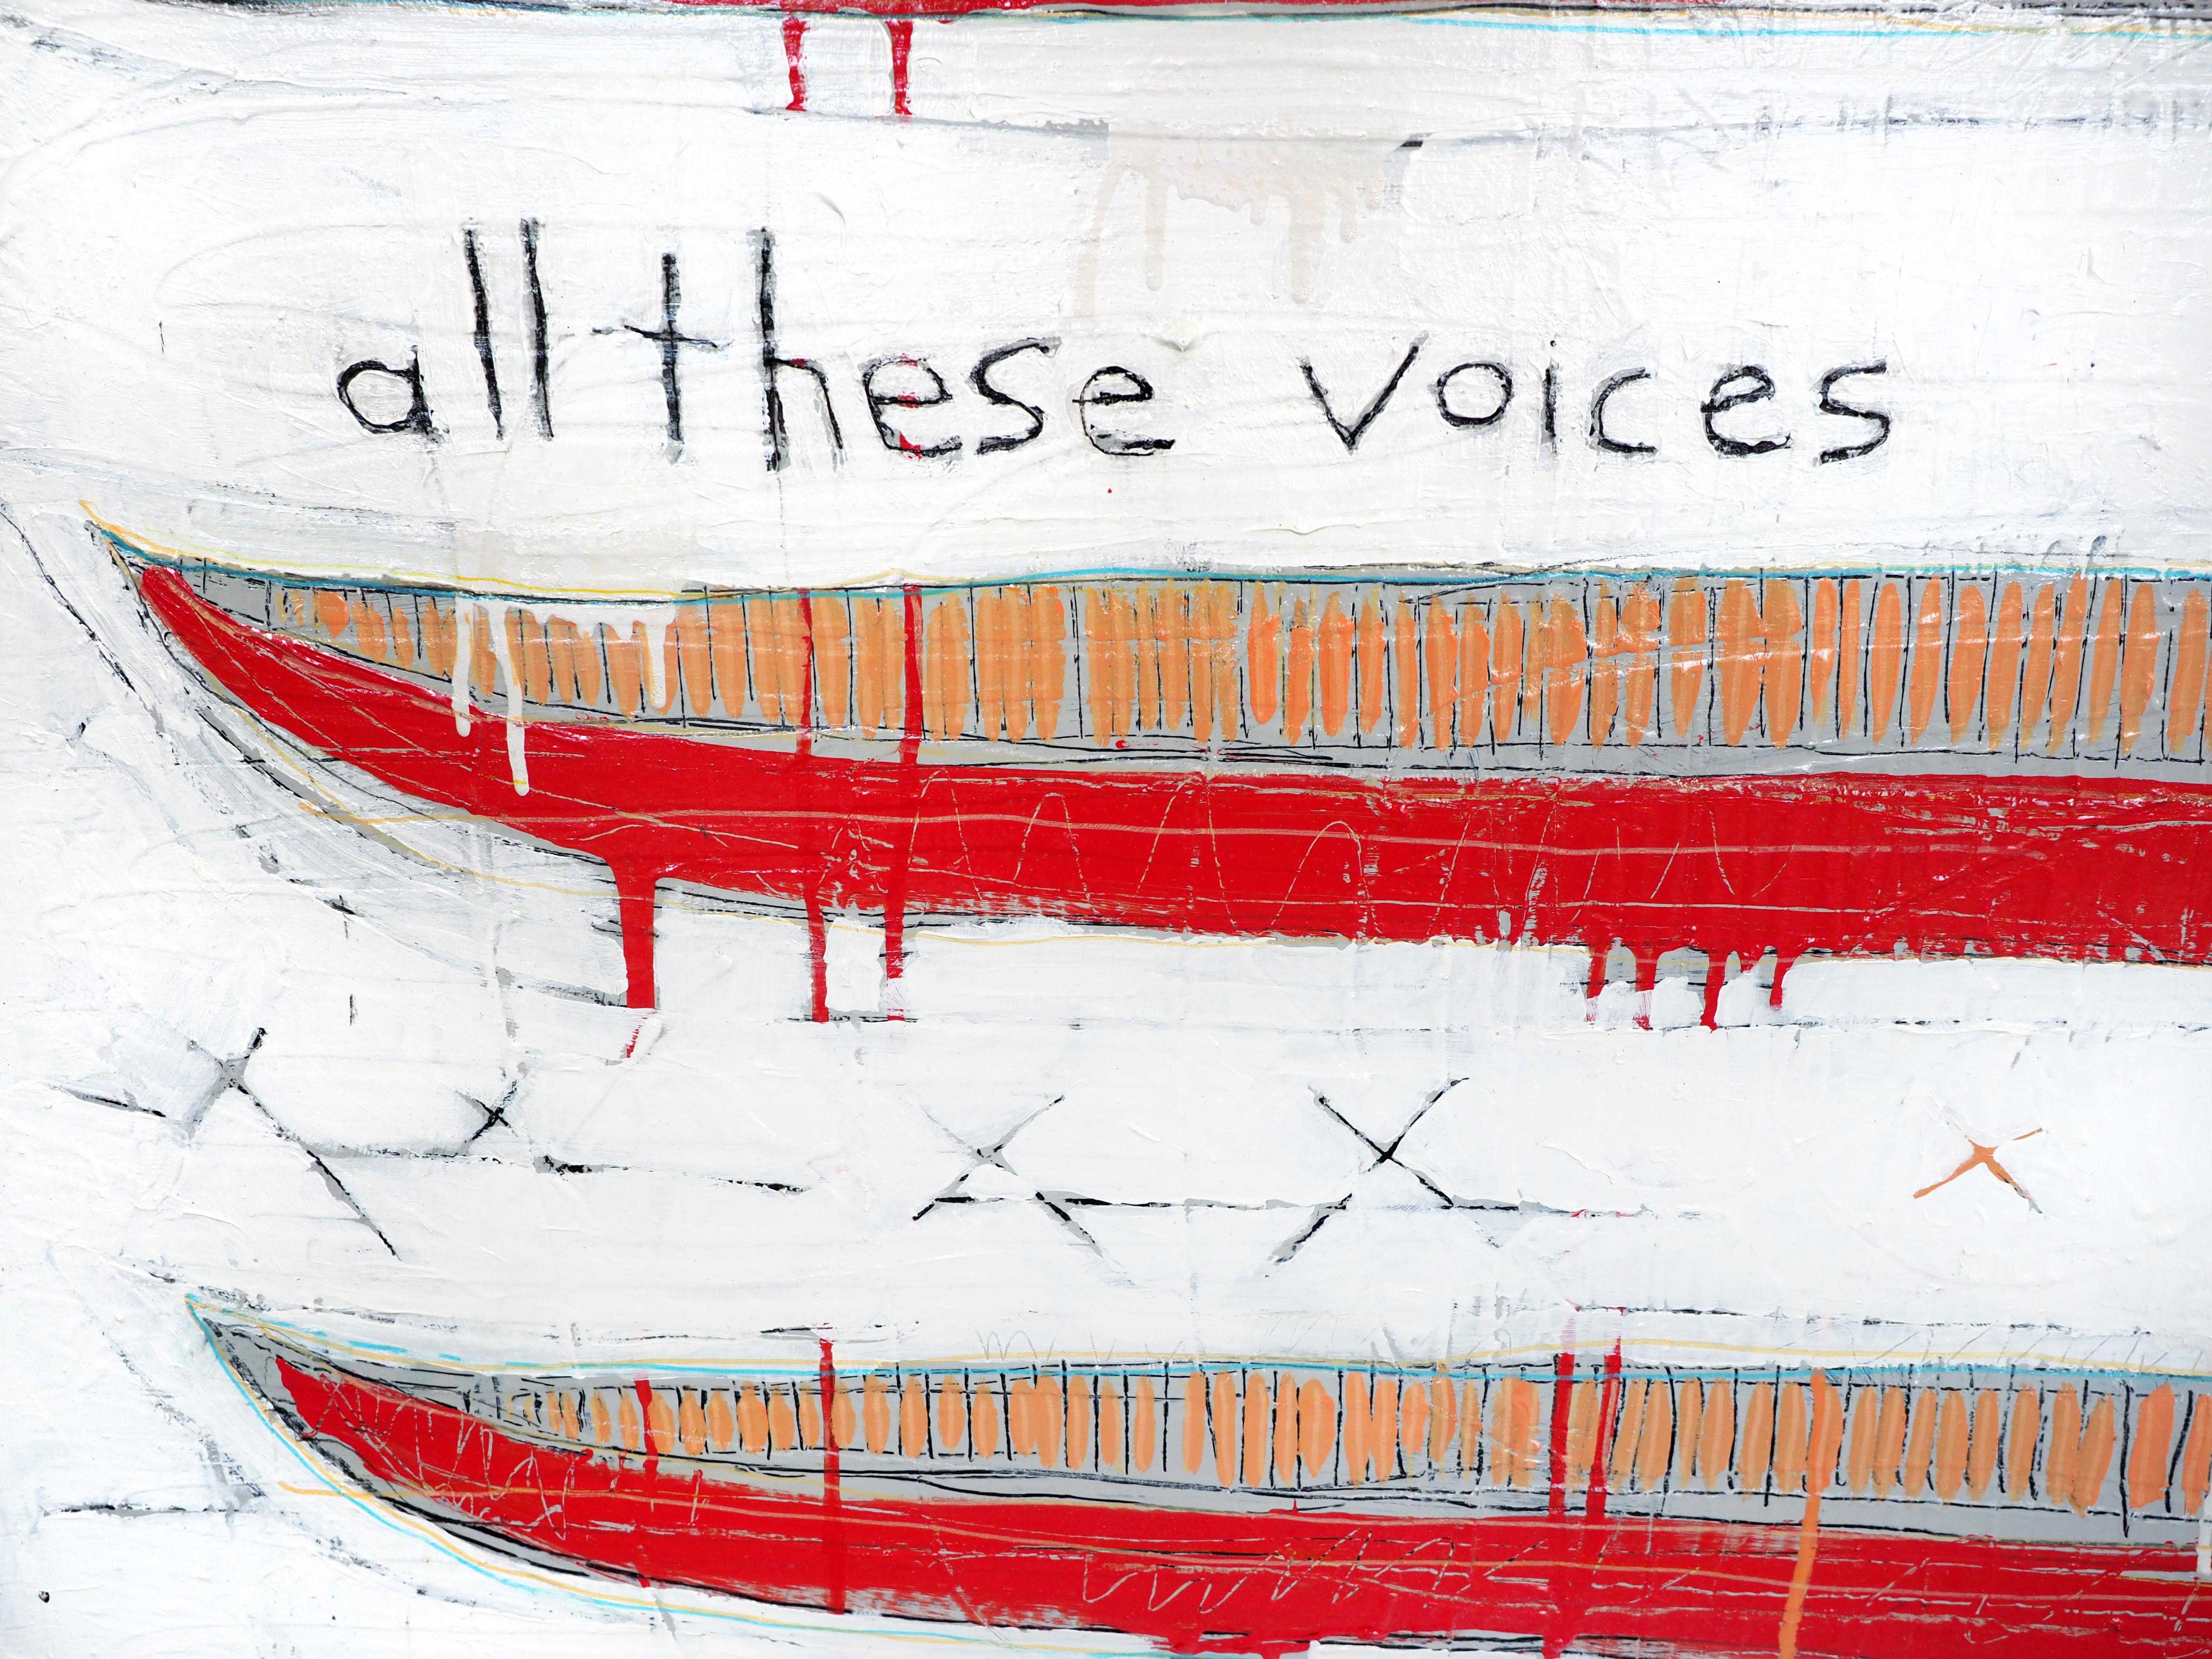 Manifest - All These Voices - Contemporary Painting by Chris McAdoo